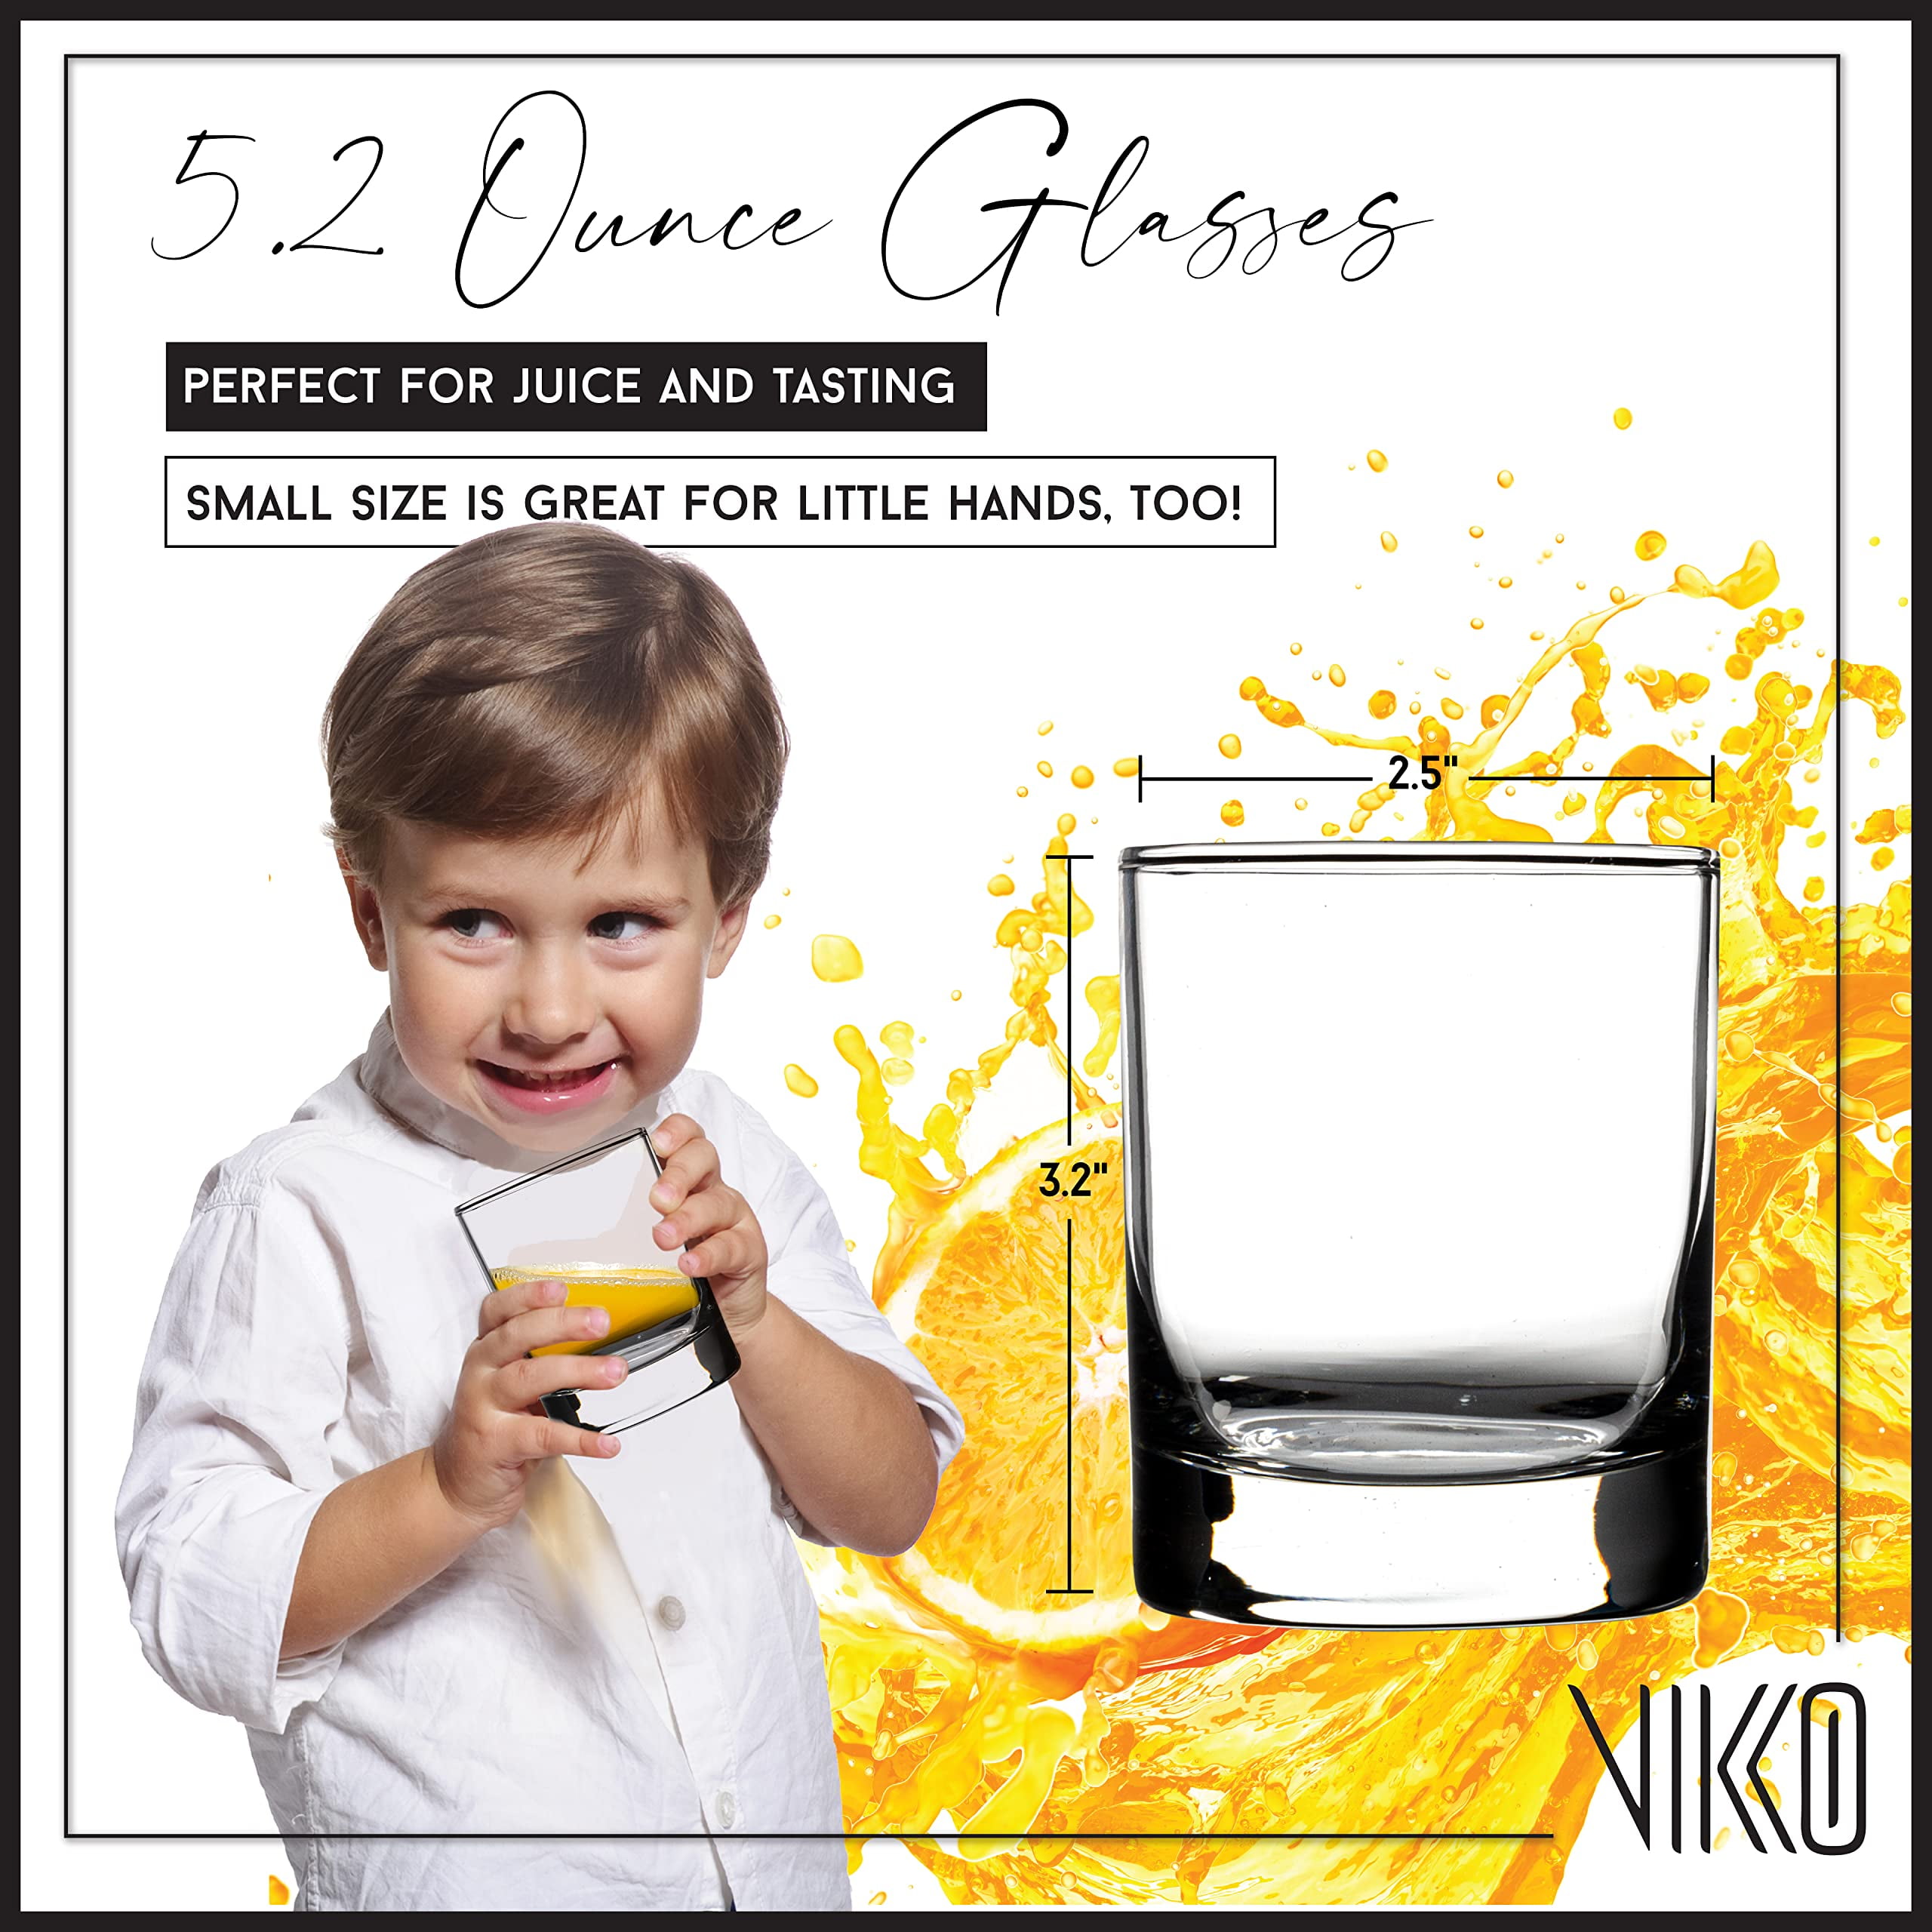 Vikko 9.5 Ounce Drinking Glasses: Thick and Durable Kitchen Glasses - Dishwasher Safe Glass Tumbler - Heavy Duty Cups for Water, Juice, Milk, Soda 